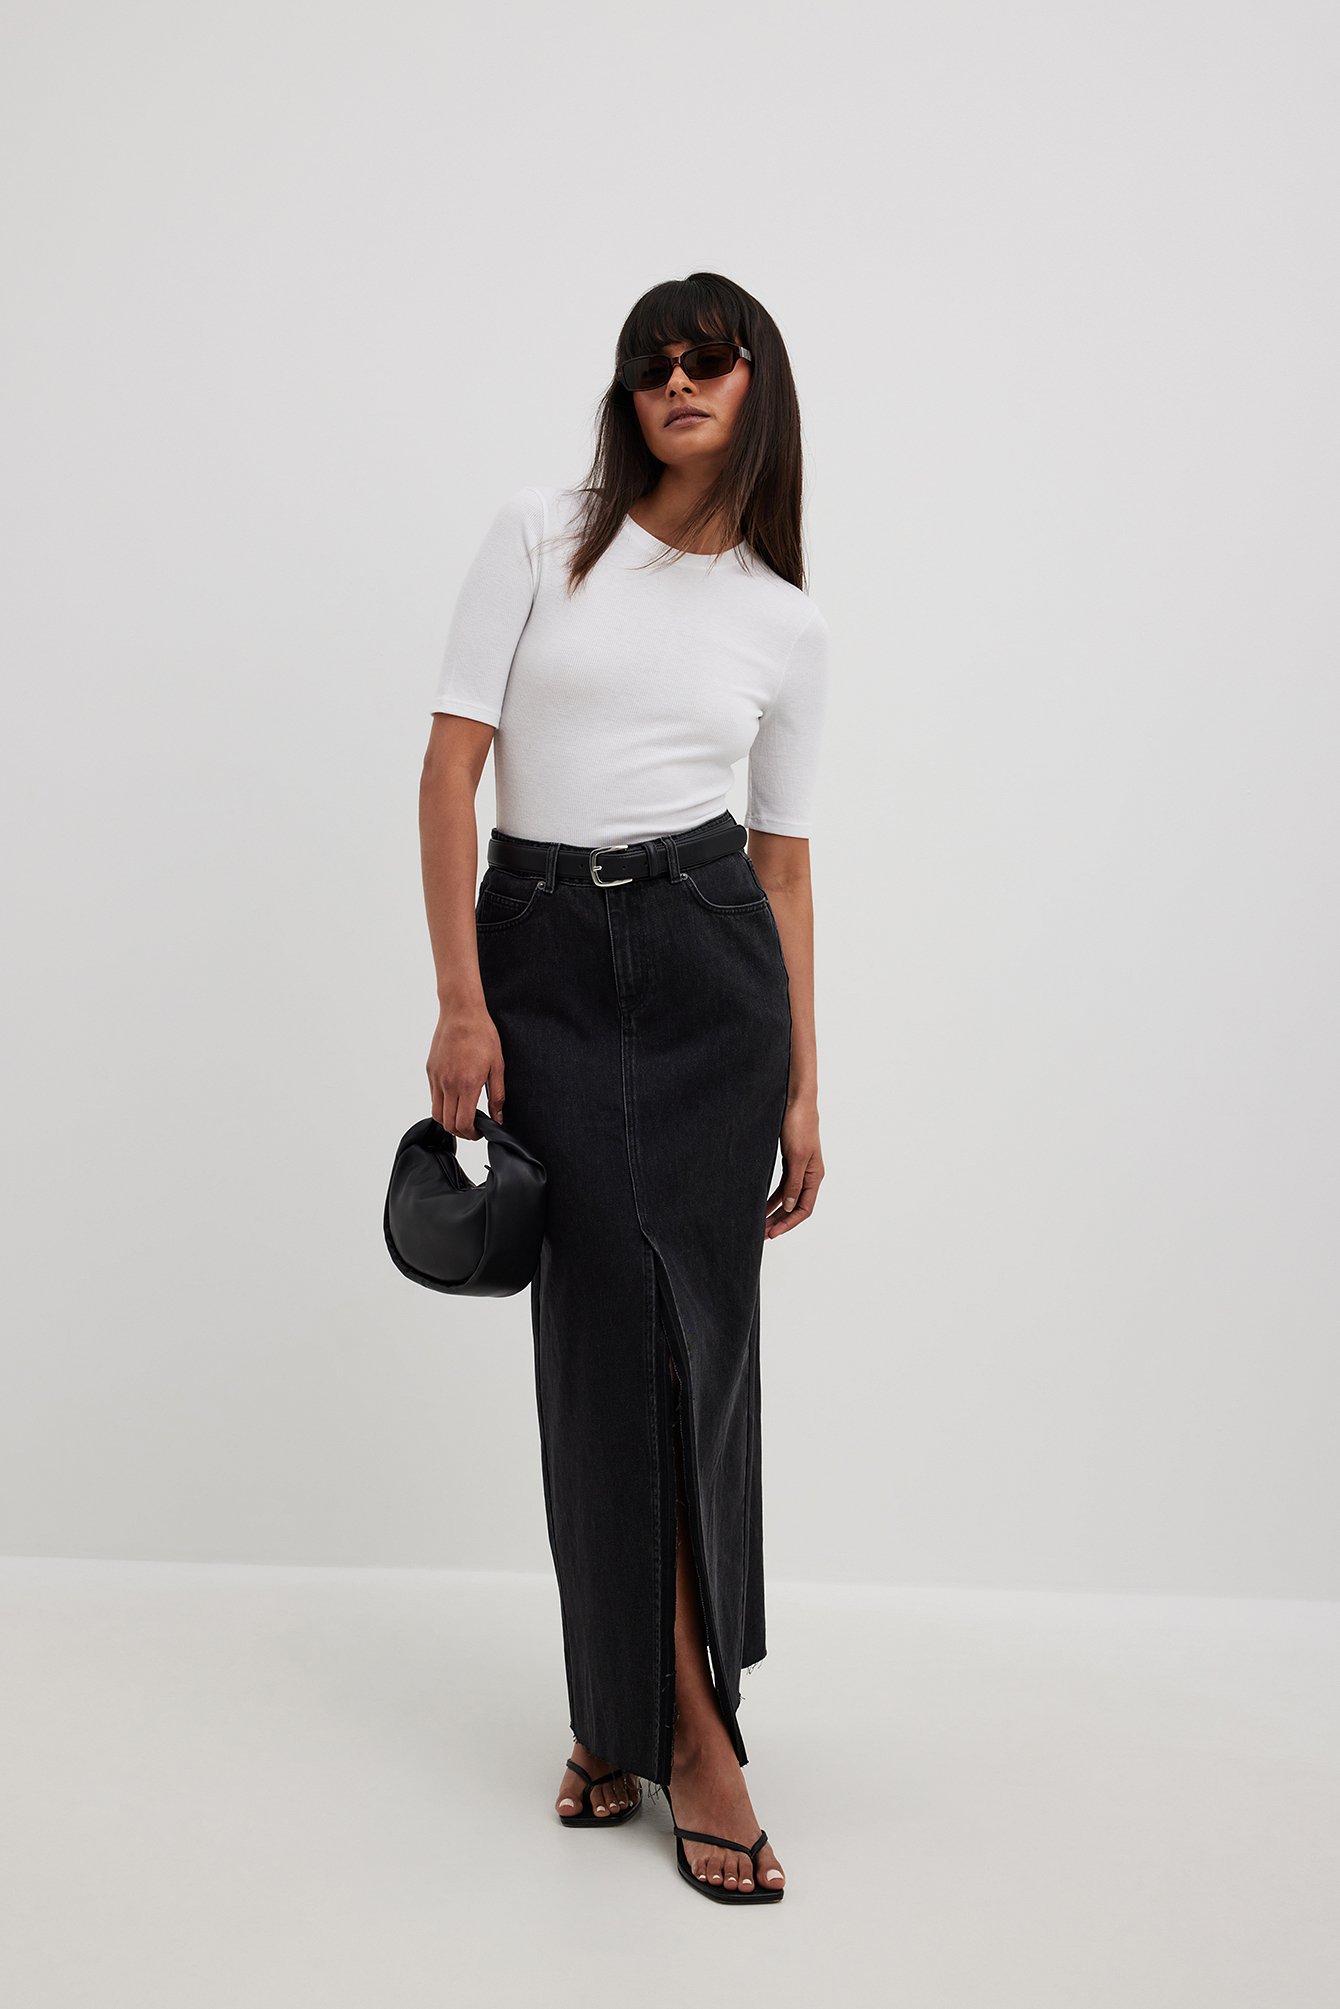 Luck A Retro High Waist Denim Black Denim Midi Skirt With Button Pockets  For Girls And Women Straight Maxi Jeans In Plus Size 210401 From Cong00,  $17.37 | DHgate.Com